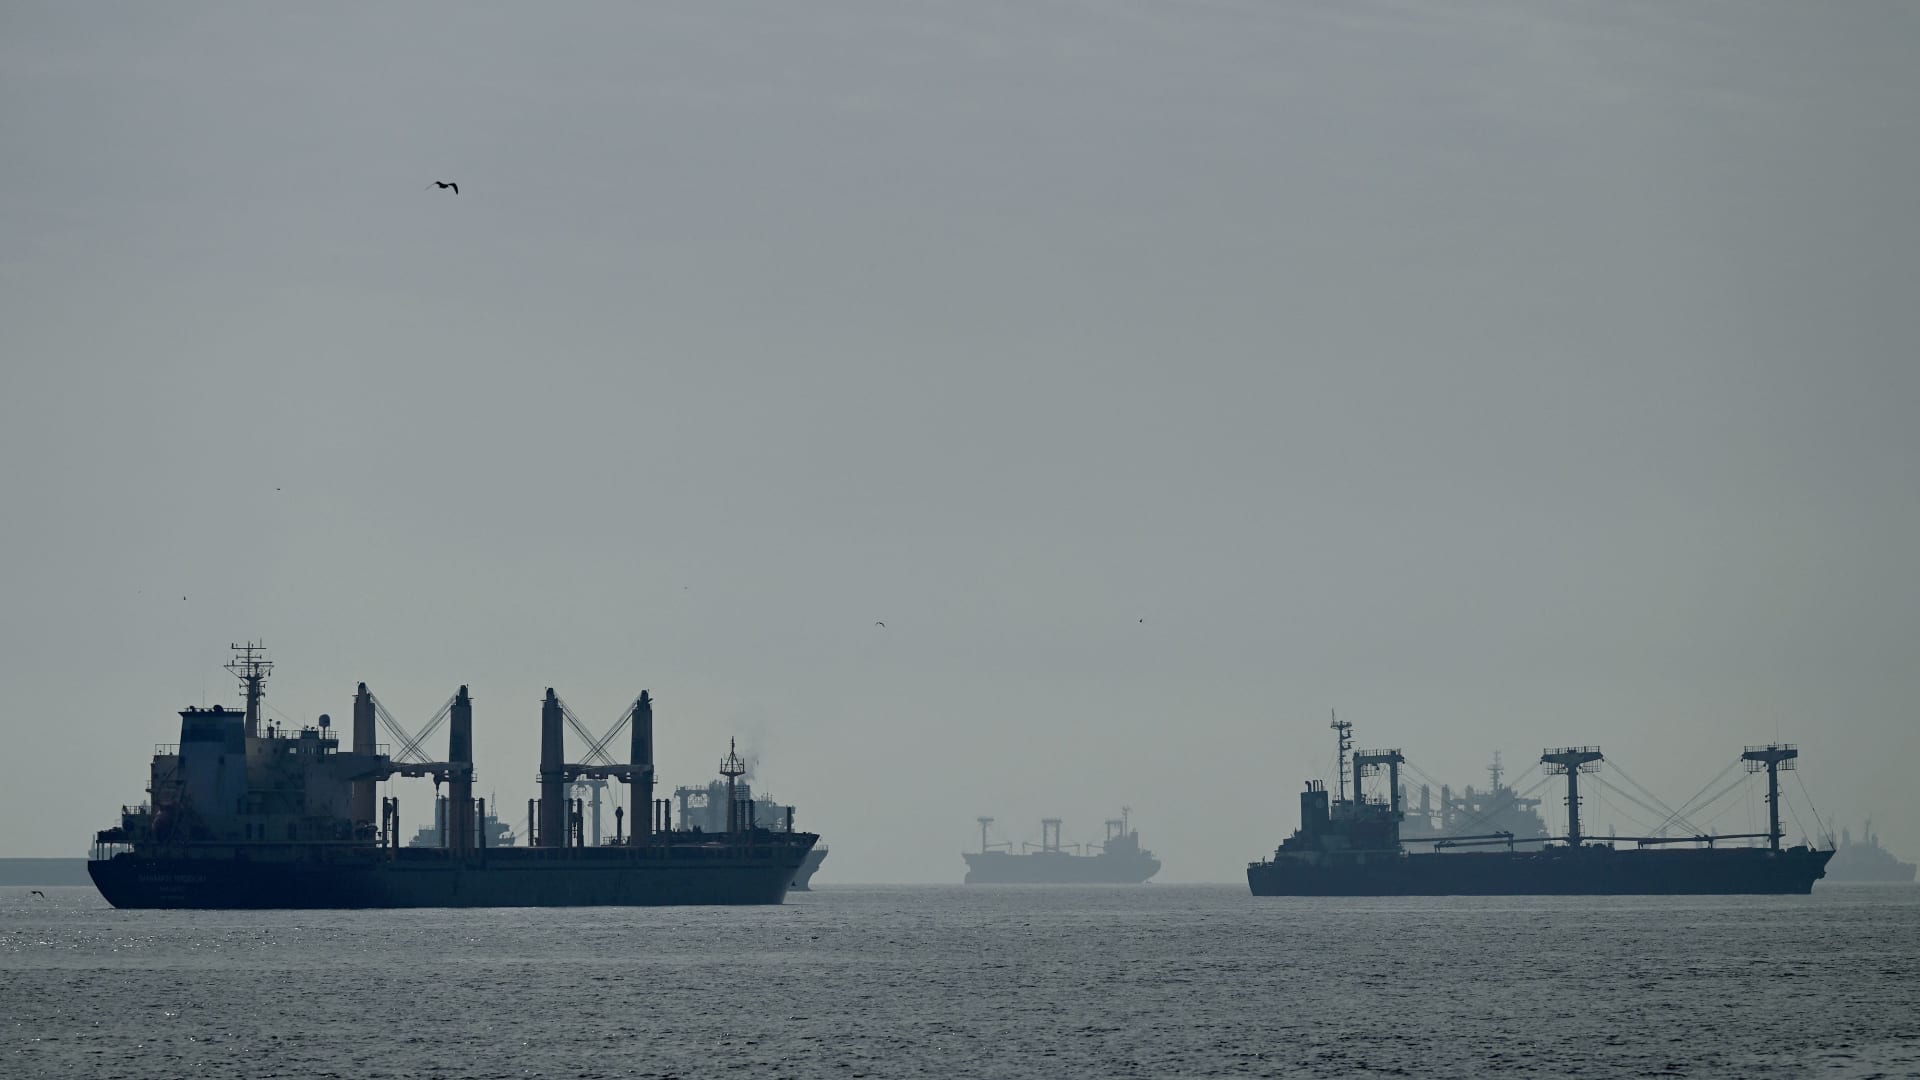 A photograph taken on October 31, 2022 shows cargo ships loaded with grain in the anchorage area of the southern entrance to the Bosphorus in Istanbul.